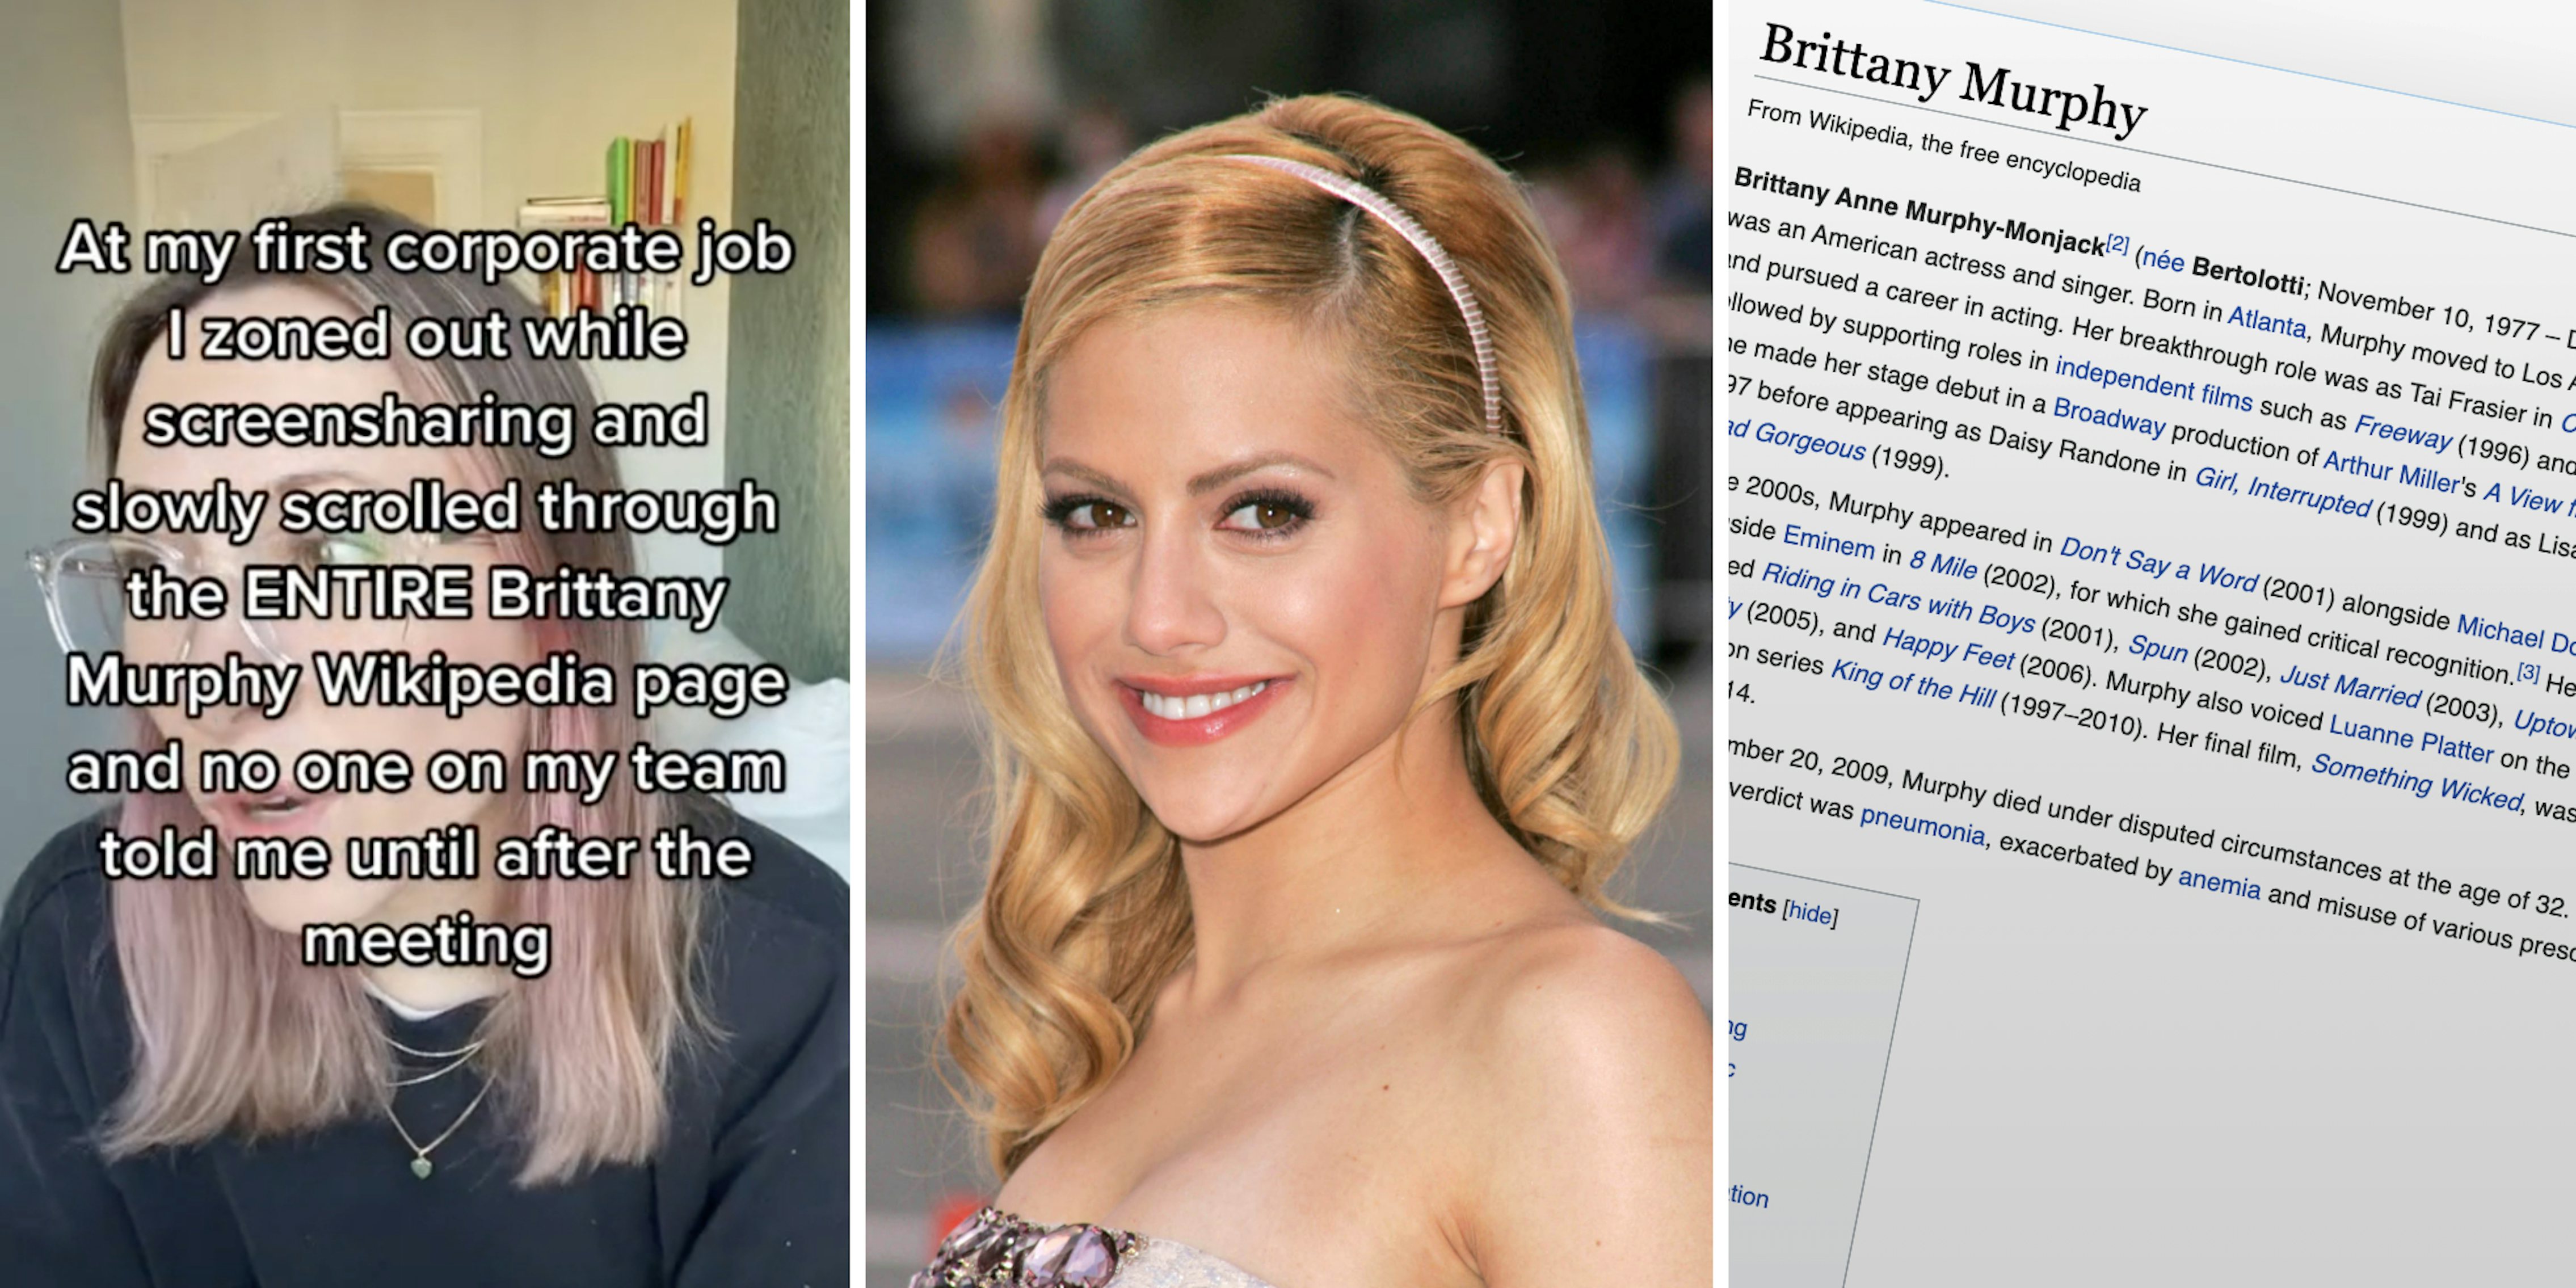 Woman Shows Brittany Murphy's Wikipedia While Screen-Sharing at Work